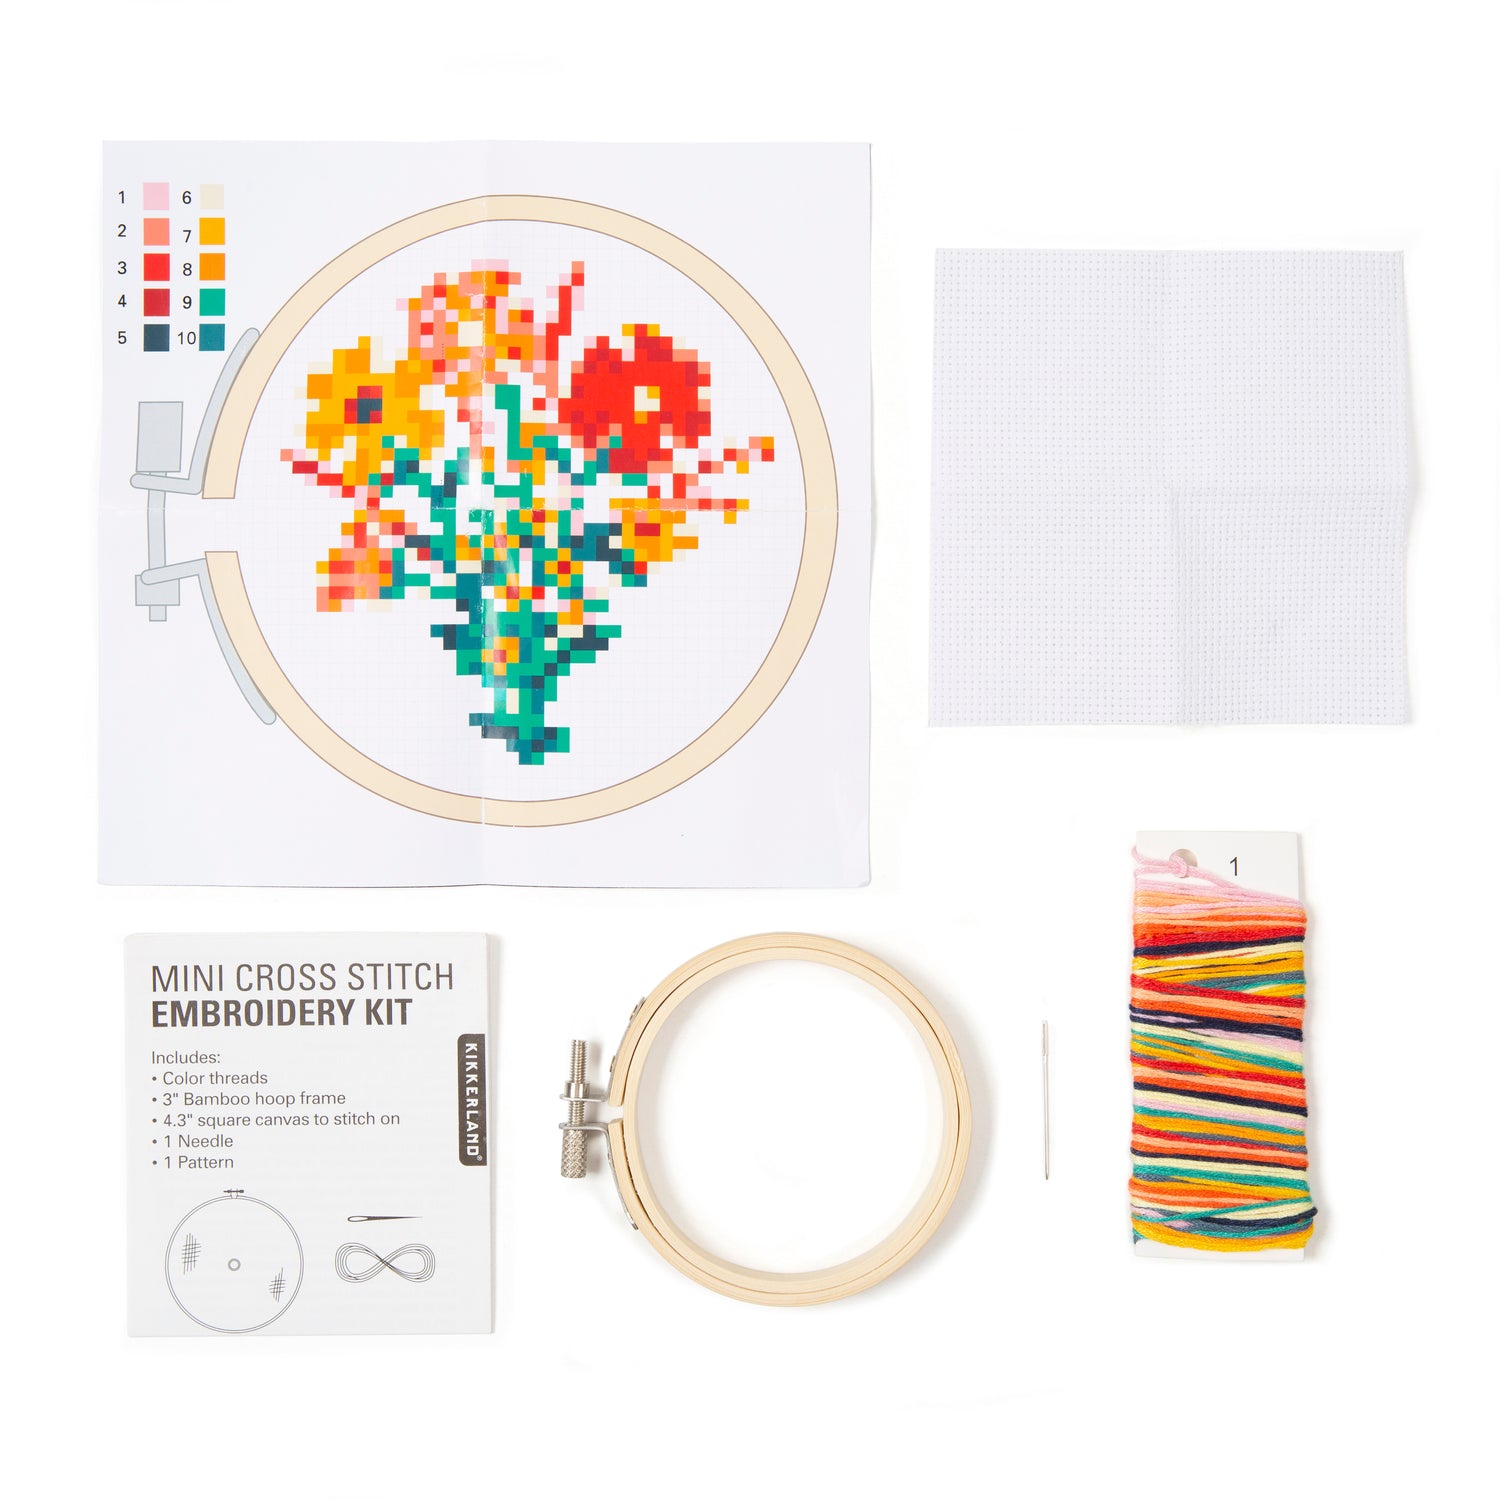 Mini Cross Stitch Embroidery Kit. Rose or Butterfly. — Barlow Blue